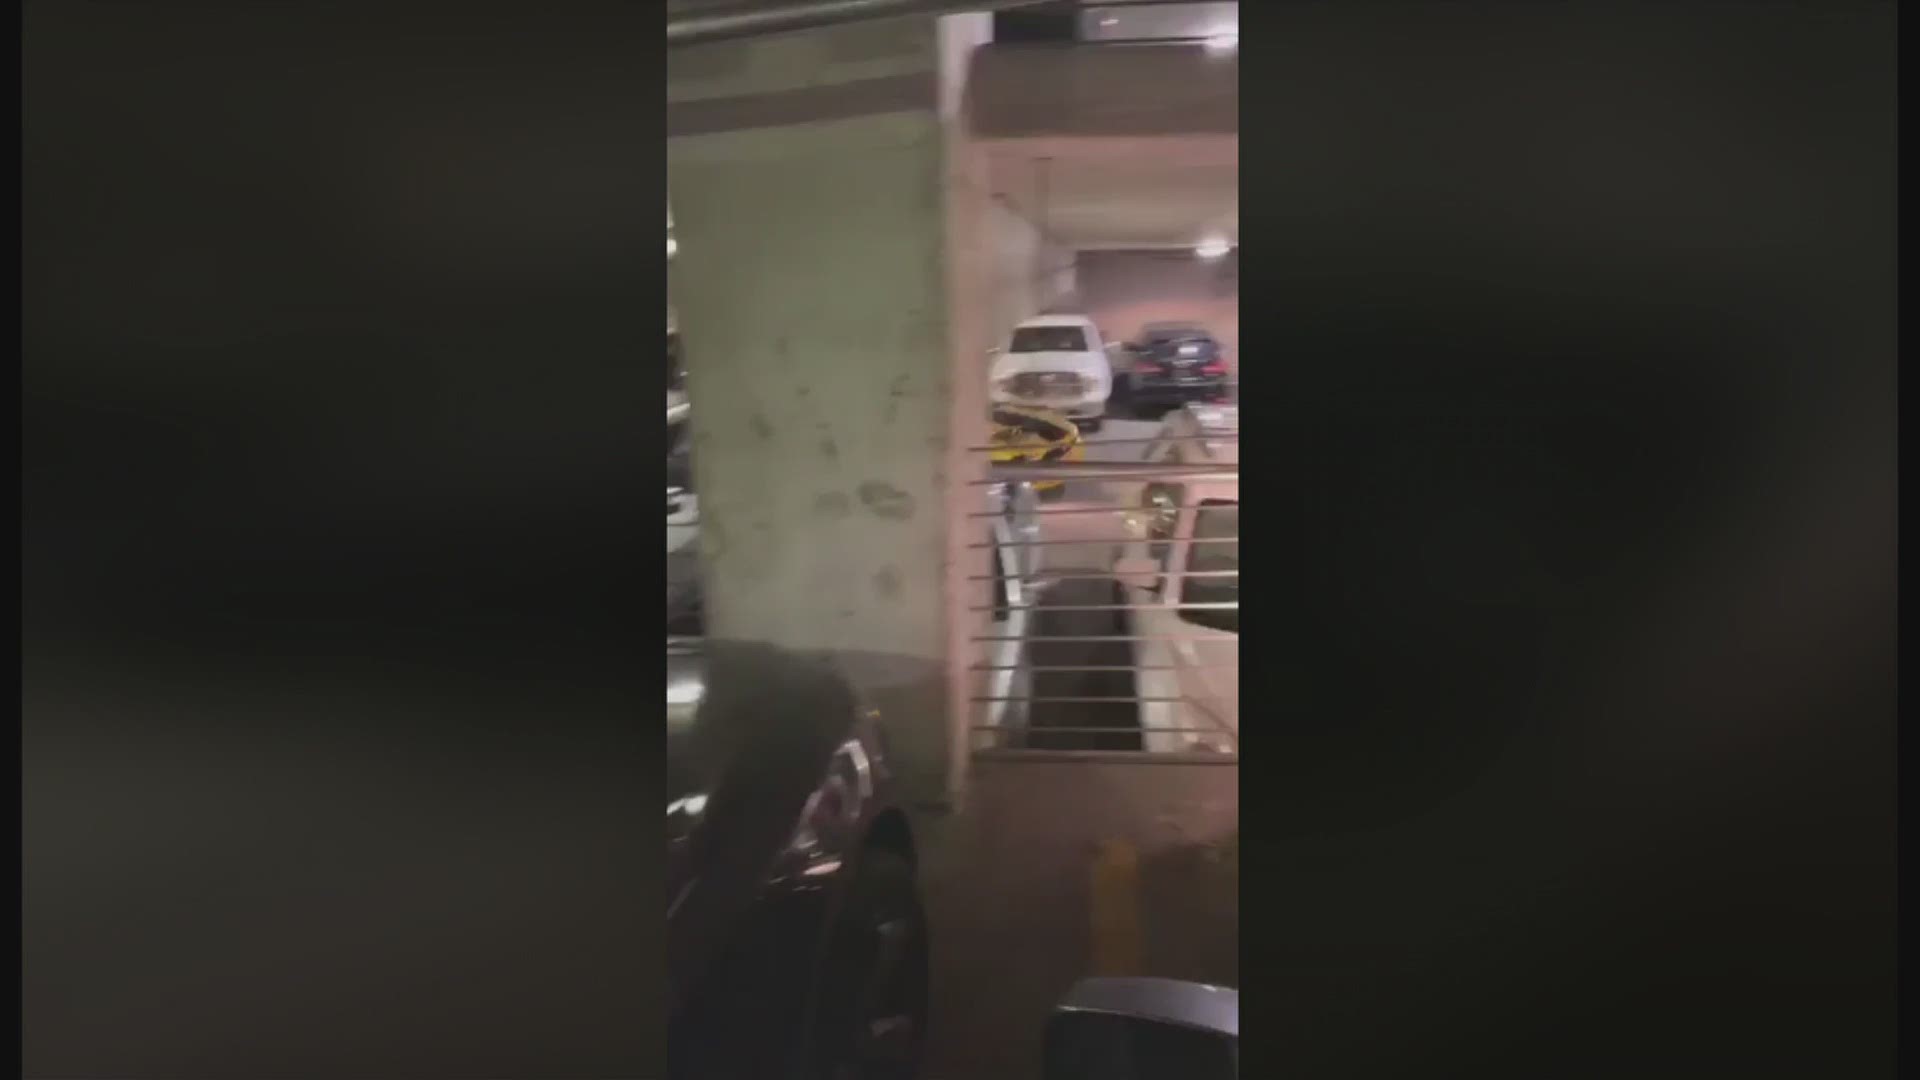 Video provided by Jordan Peterson shows the driver of a yellow Ford Mustang dragging a pickup truck through a downtown Boise parking garage.